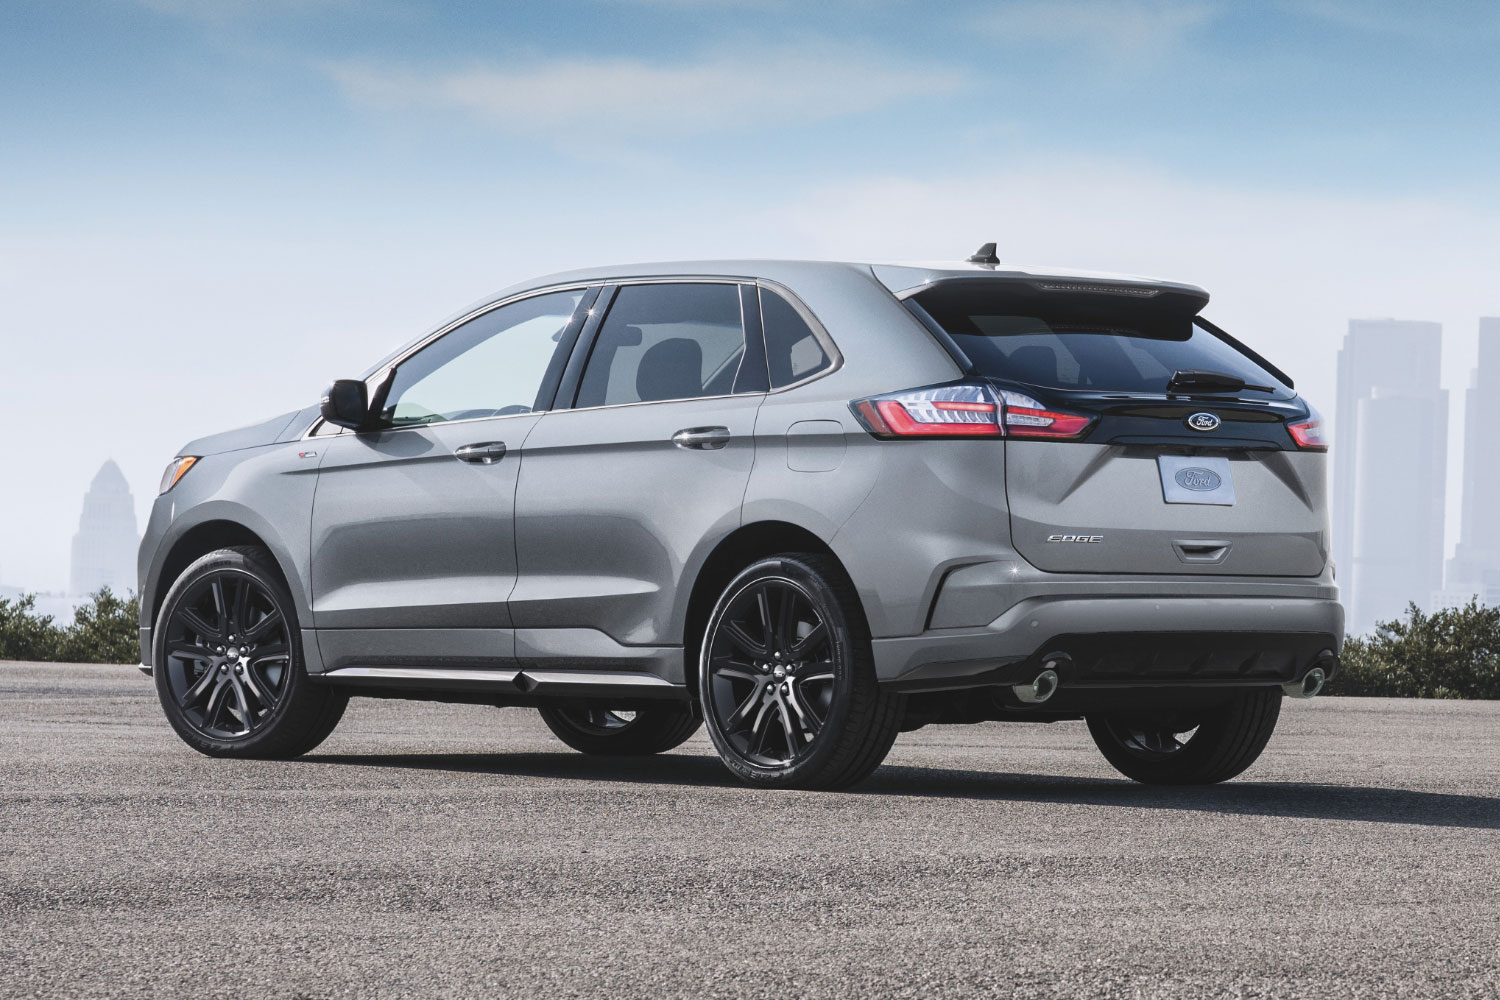 2022 Ford Edge Reviews, Price, MPG and More | Capital One Auto Navigator